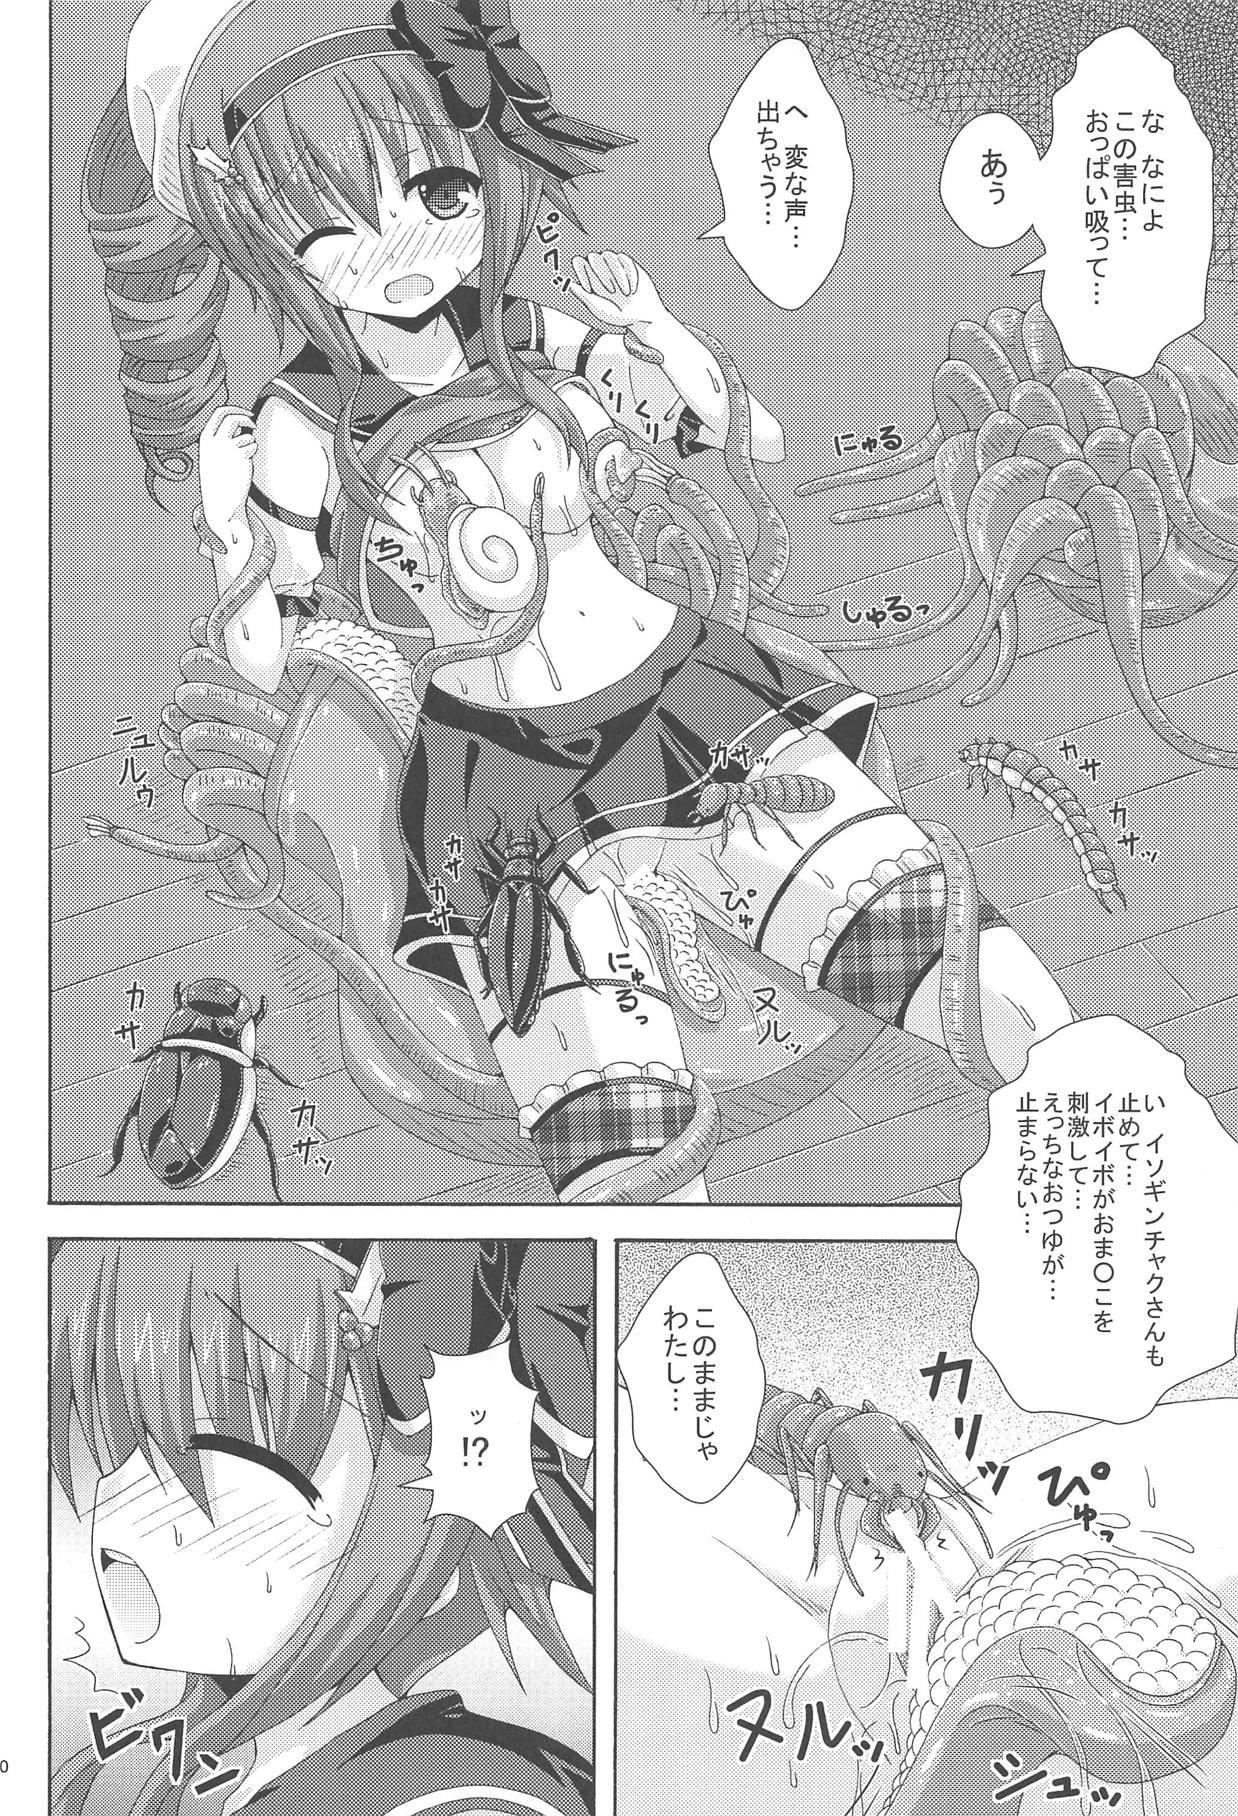 Curves Holly no Gaichuusen Tansaku - Flower knight girl Doggy Style - Page 9